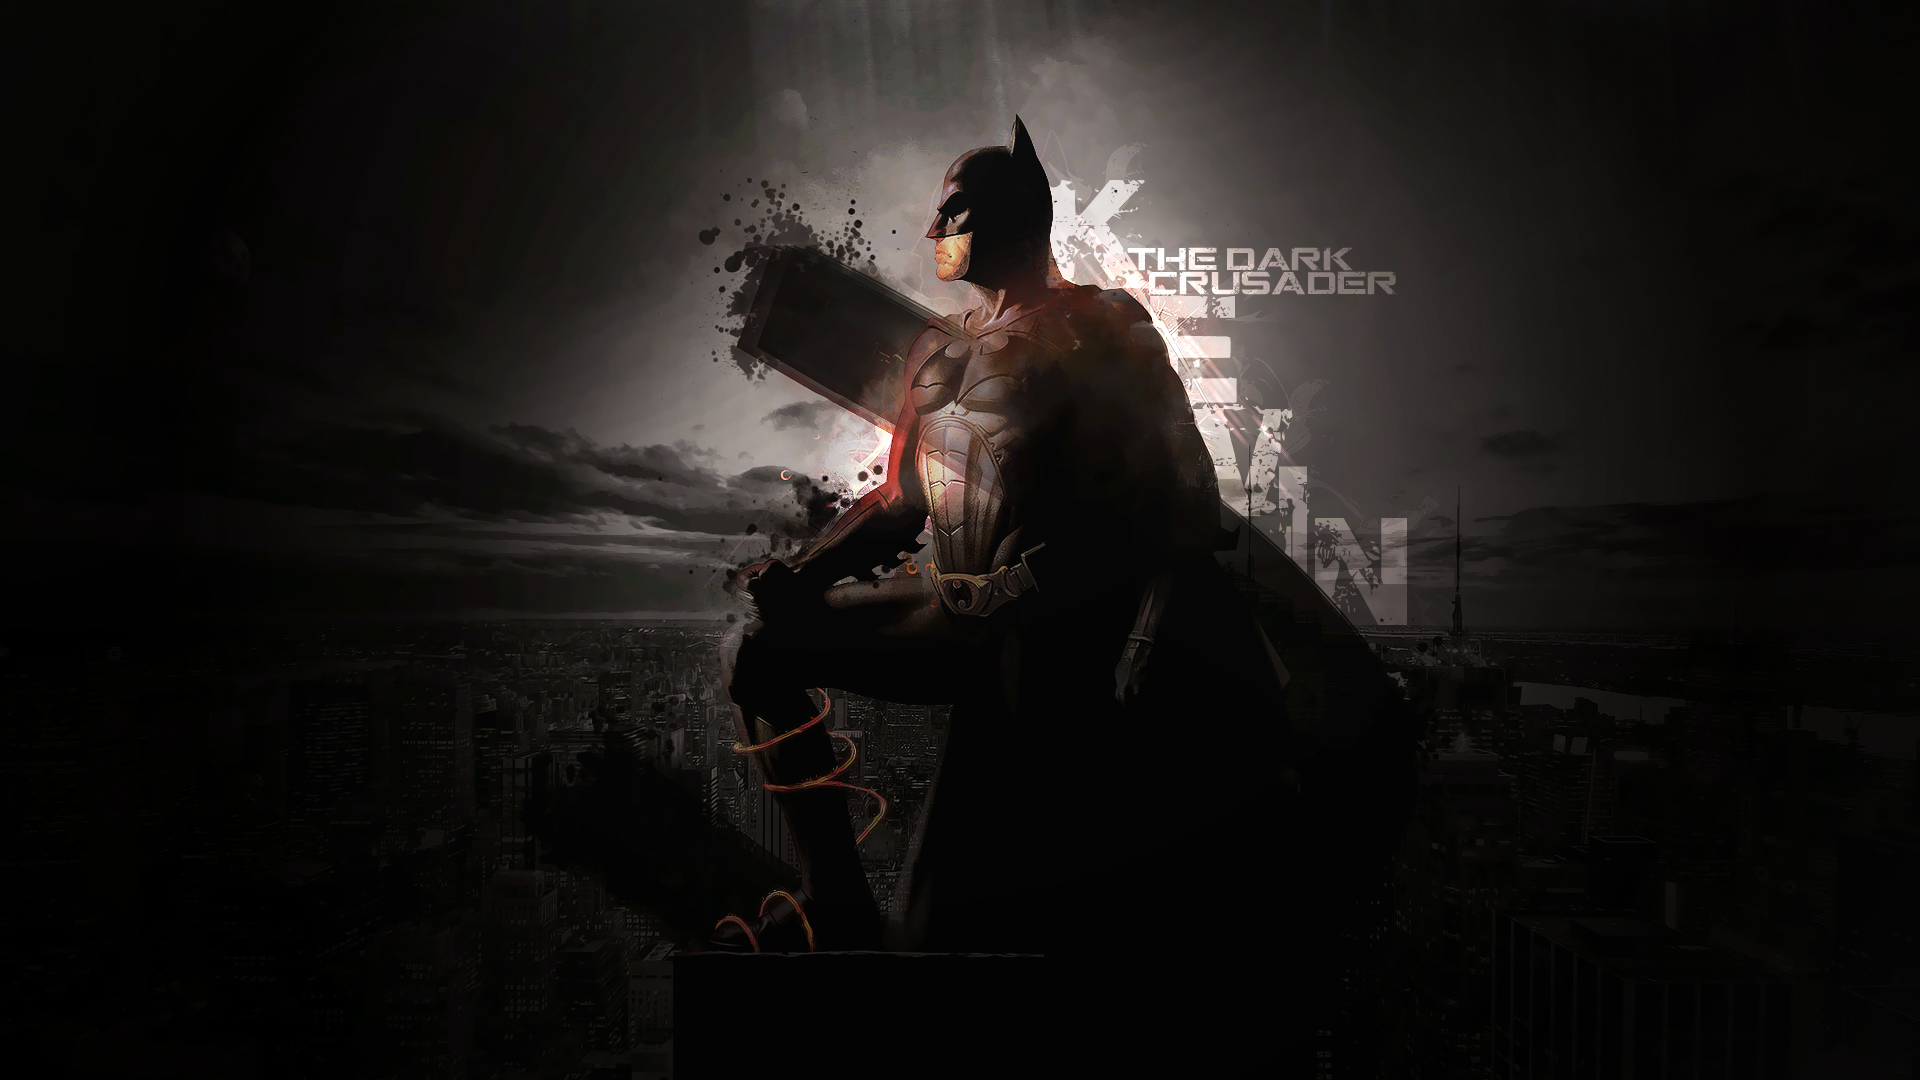 Check This Out Our New Batman Wallpaper